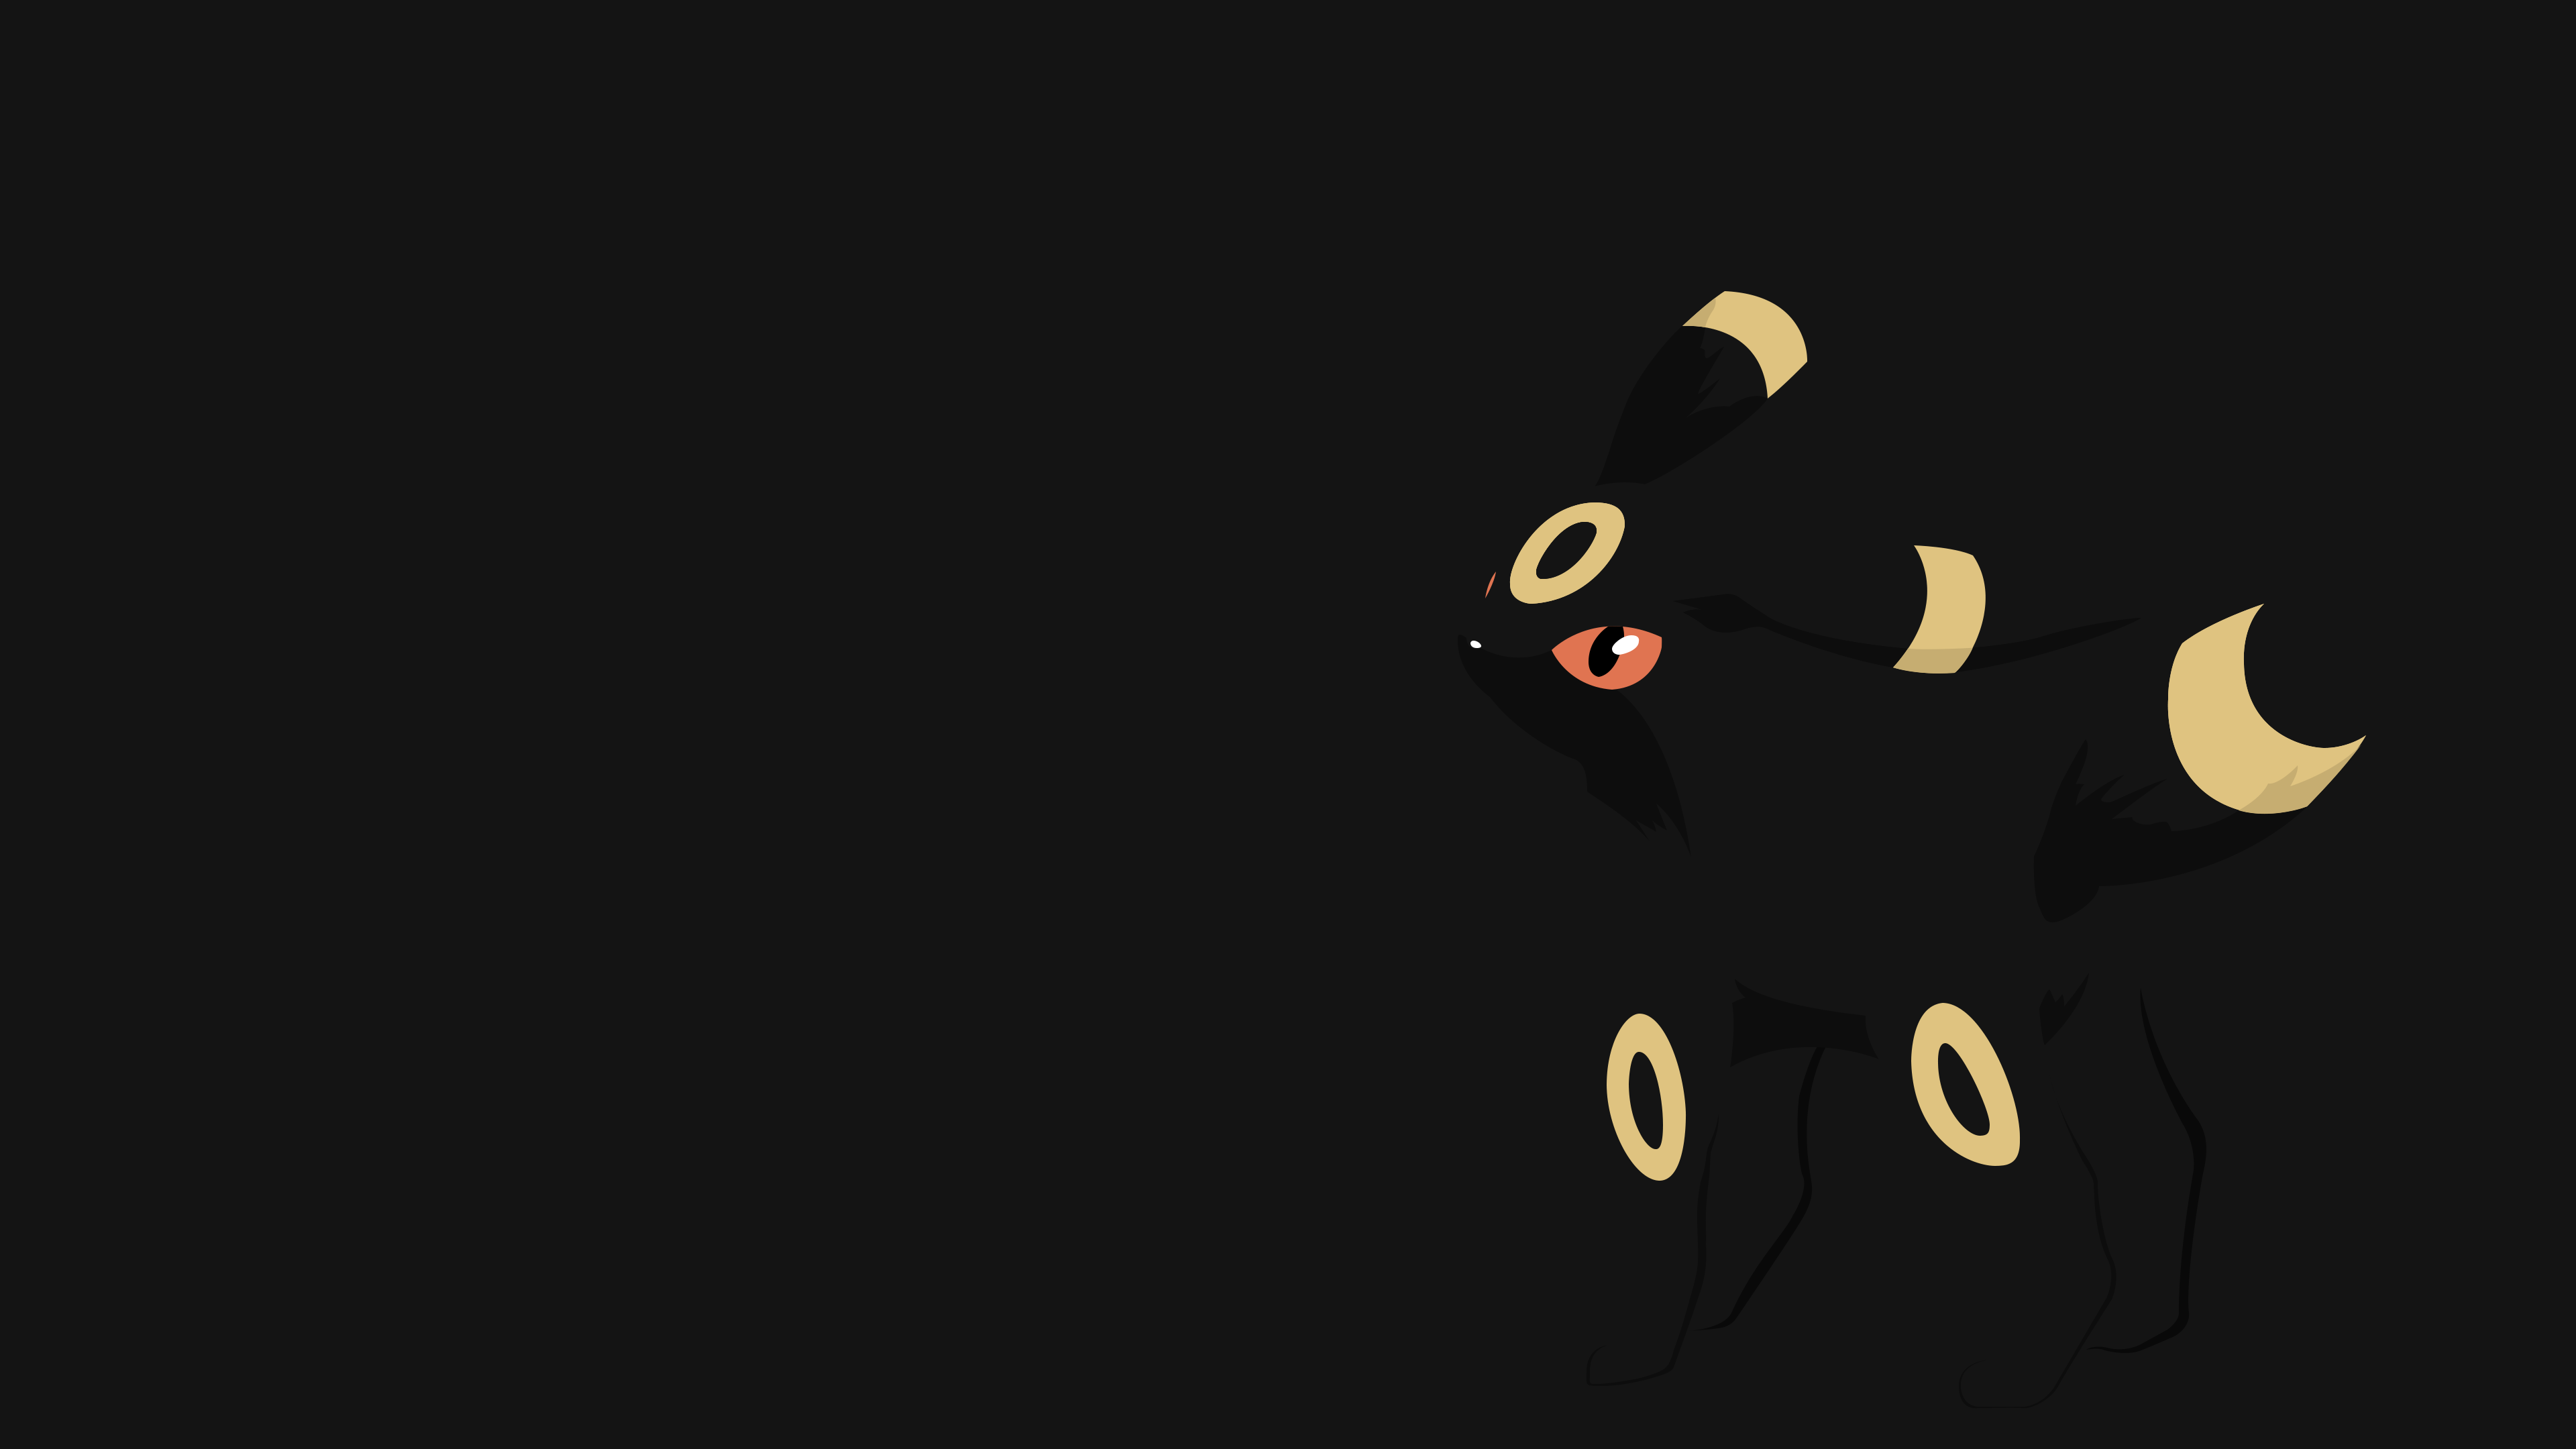 Umbreon Wallpaper [4k] Really exhausting to make, but it turned out ok imo